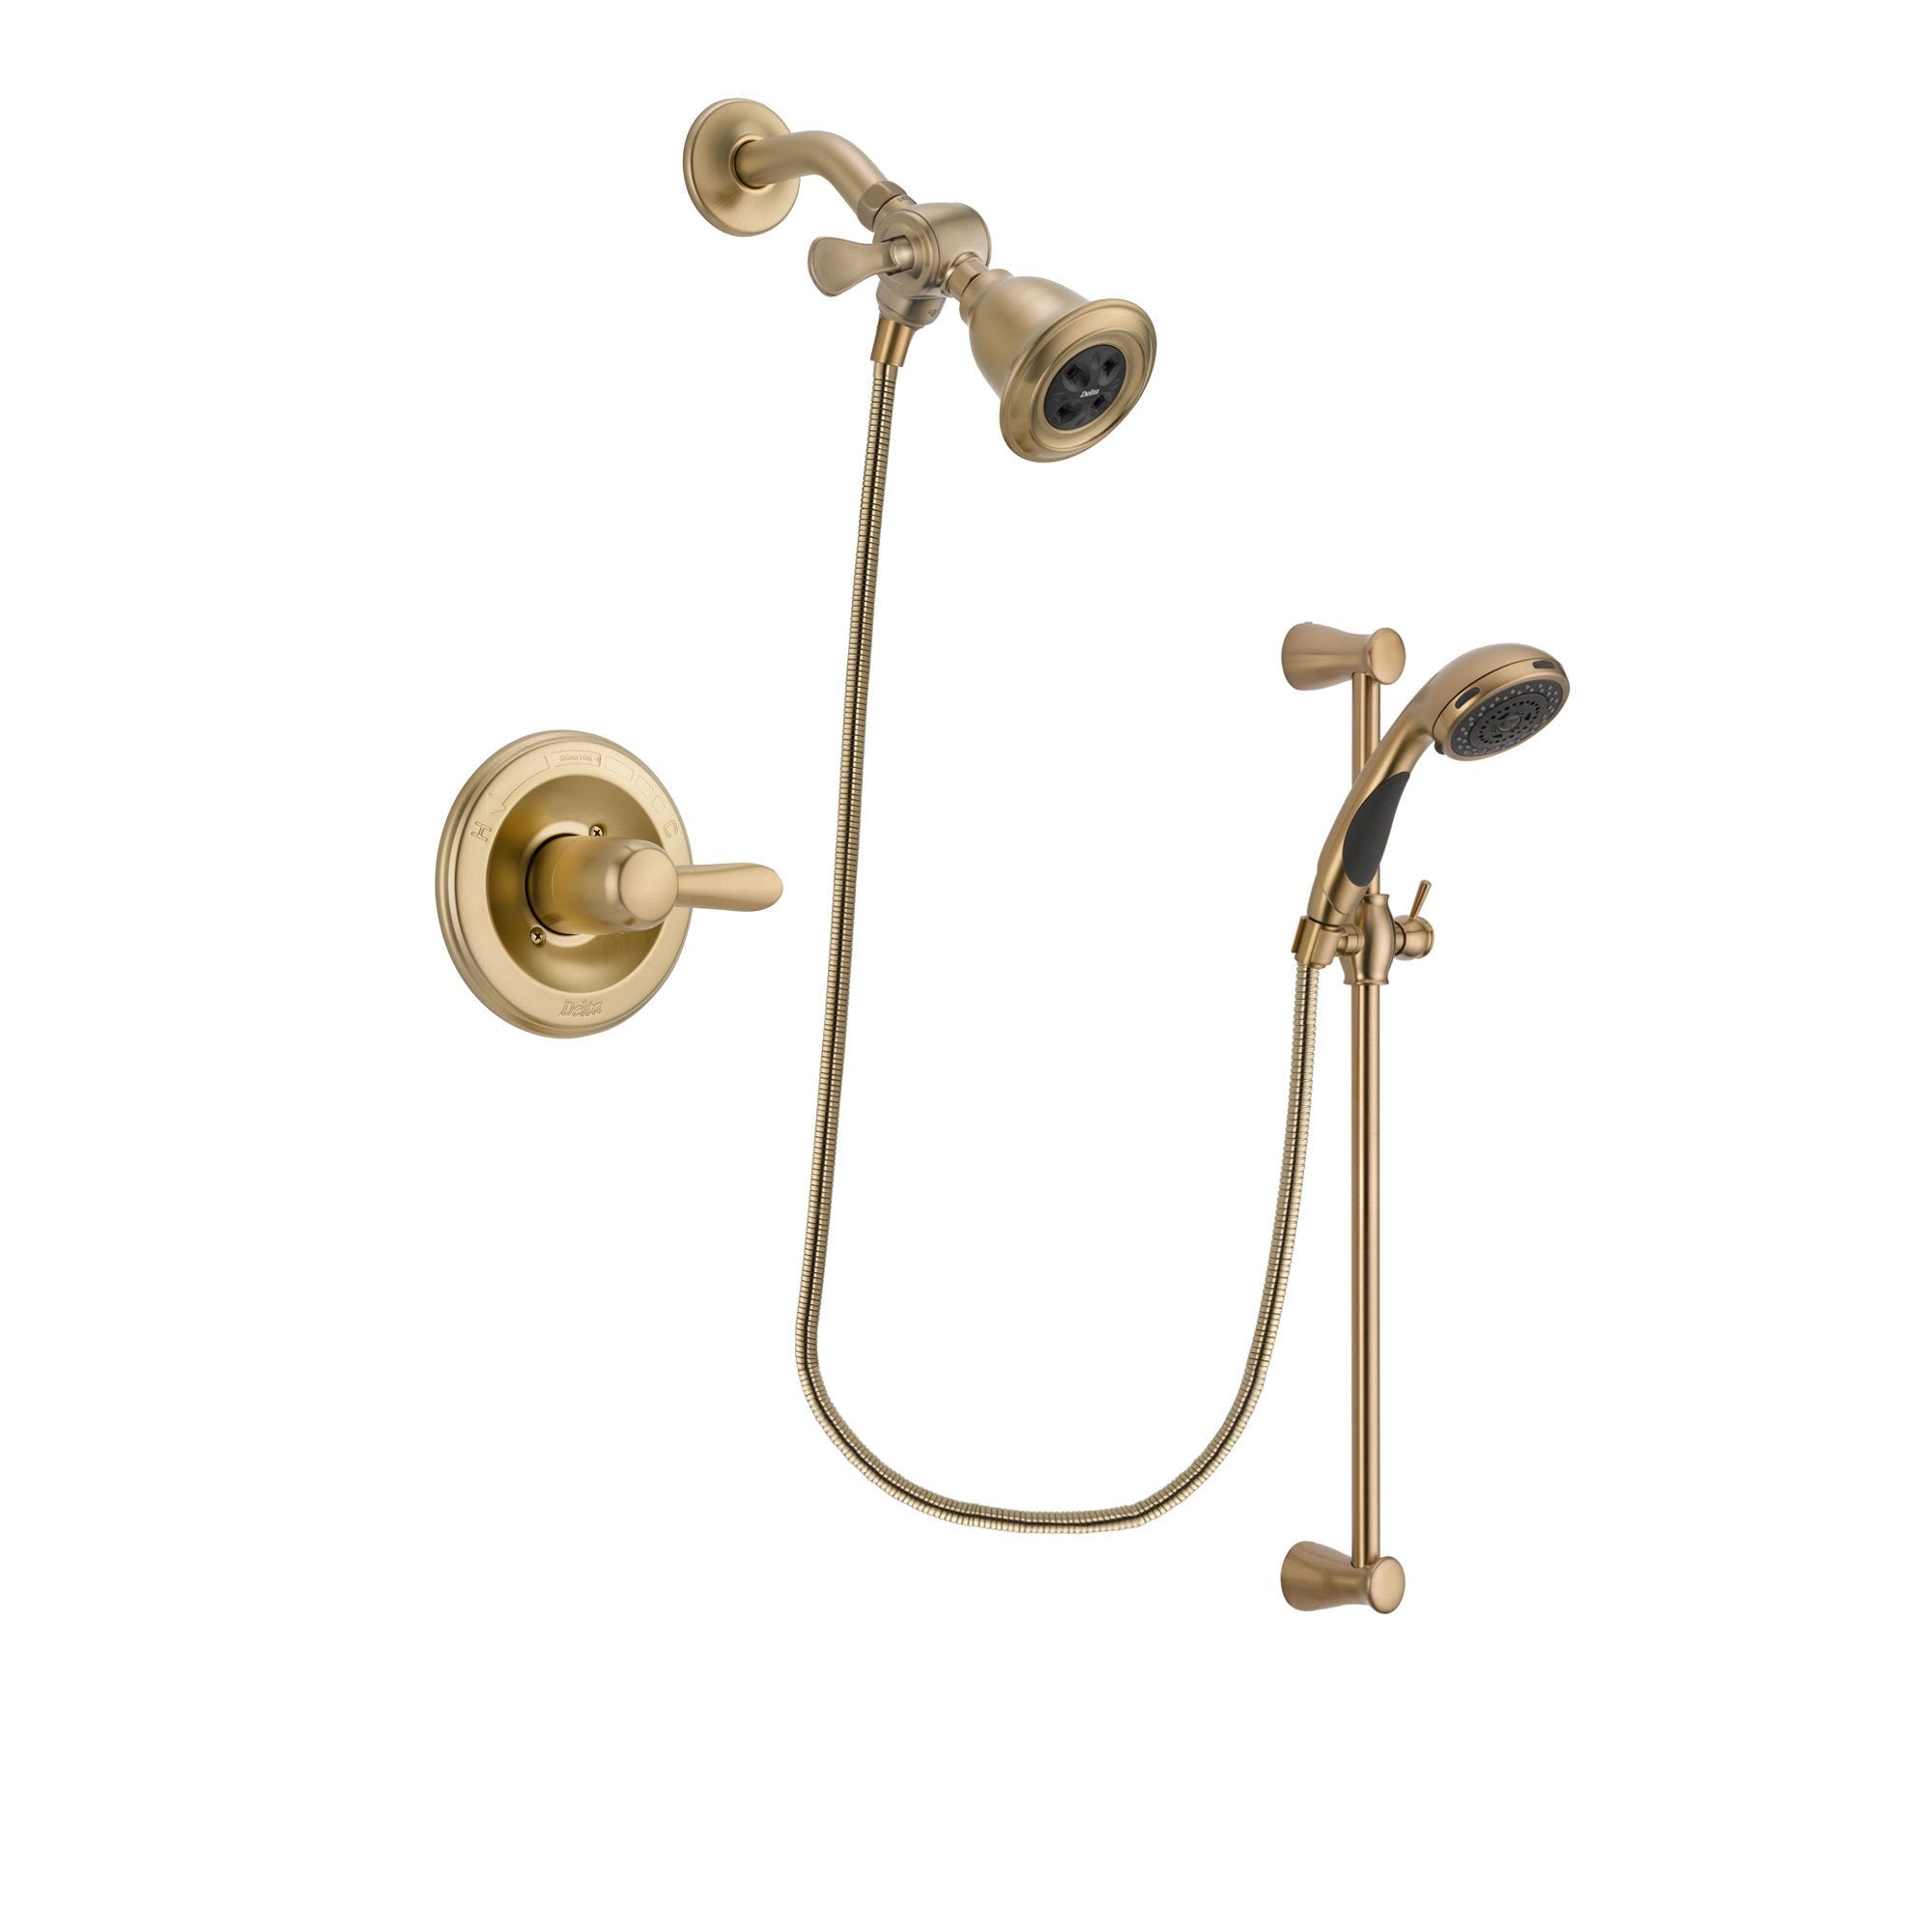 Delta Lahara Champagne Bronze Finish Shower Faucet System Package with Water Efficient Showerhead and Personal Handheld Shower Sprayer with Slide Bar Includes Rough-in Valve DSP3456V